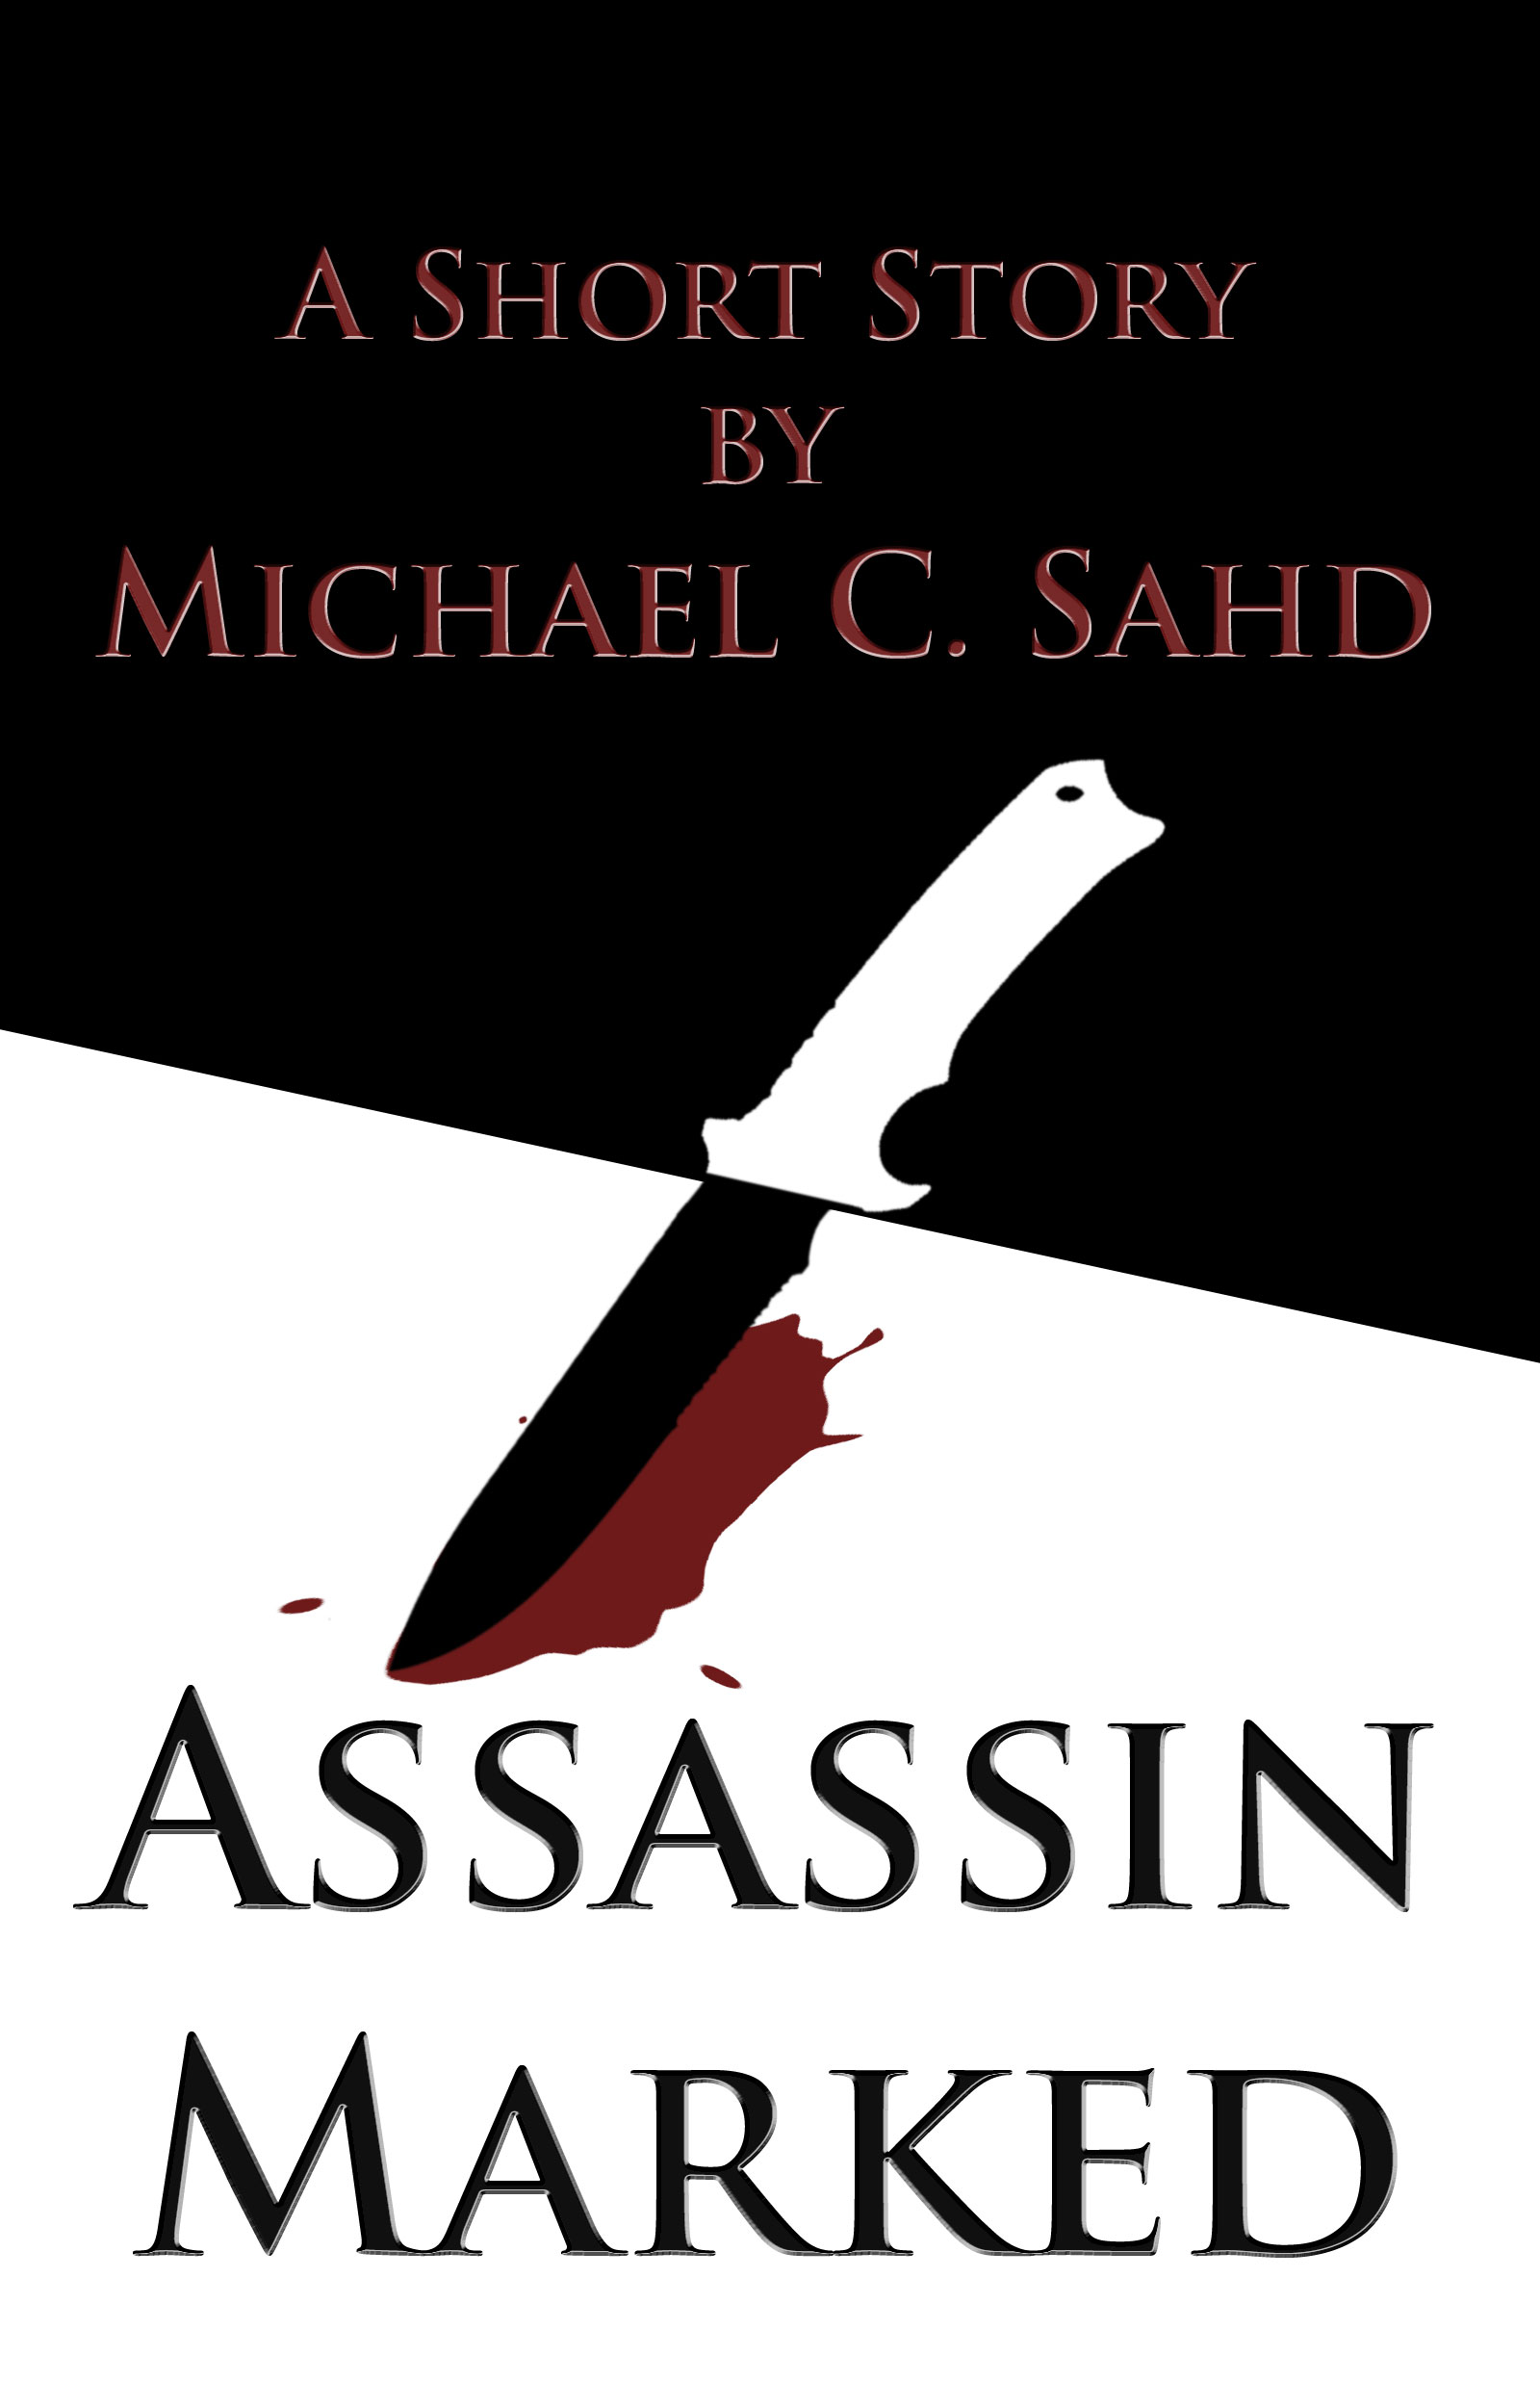 FREE: Assassin Marked by Michael C. Sahd